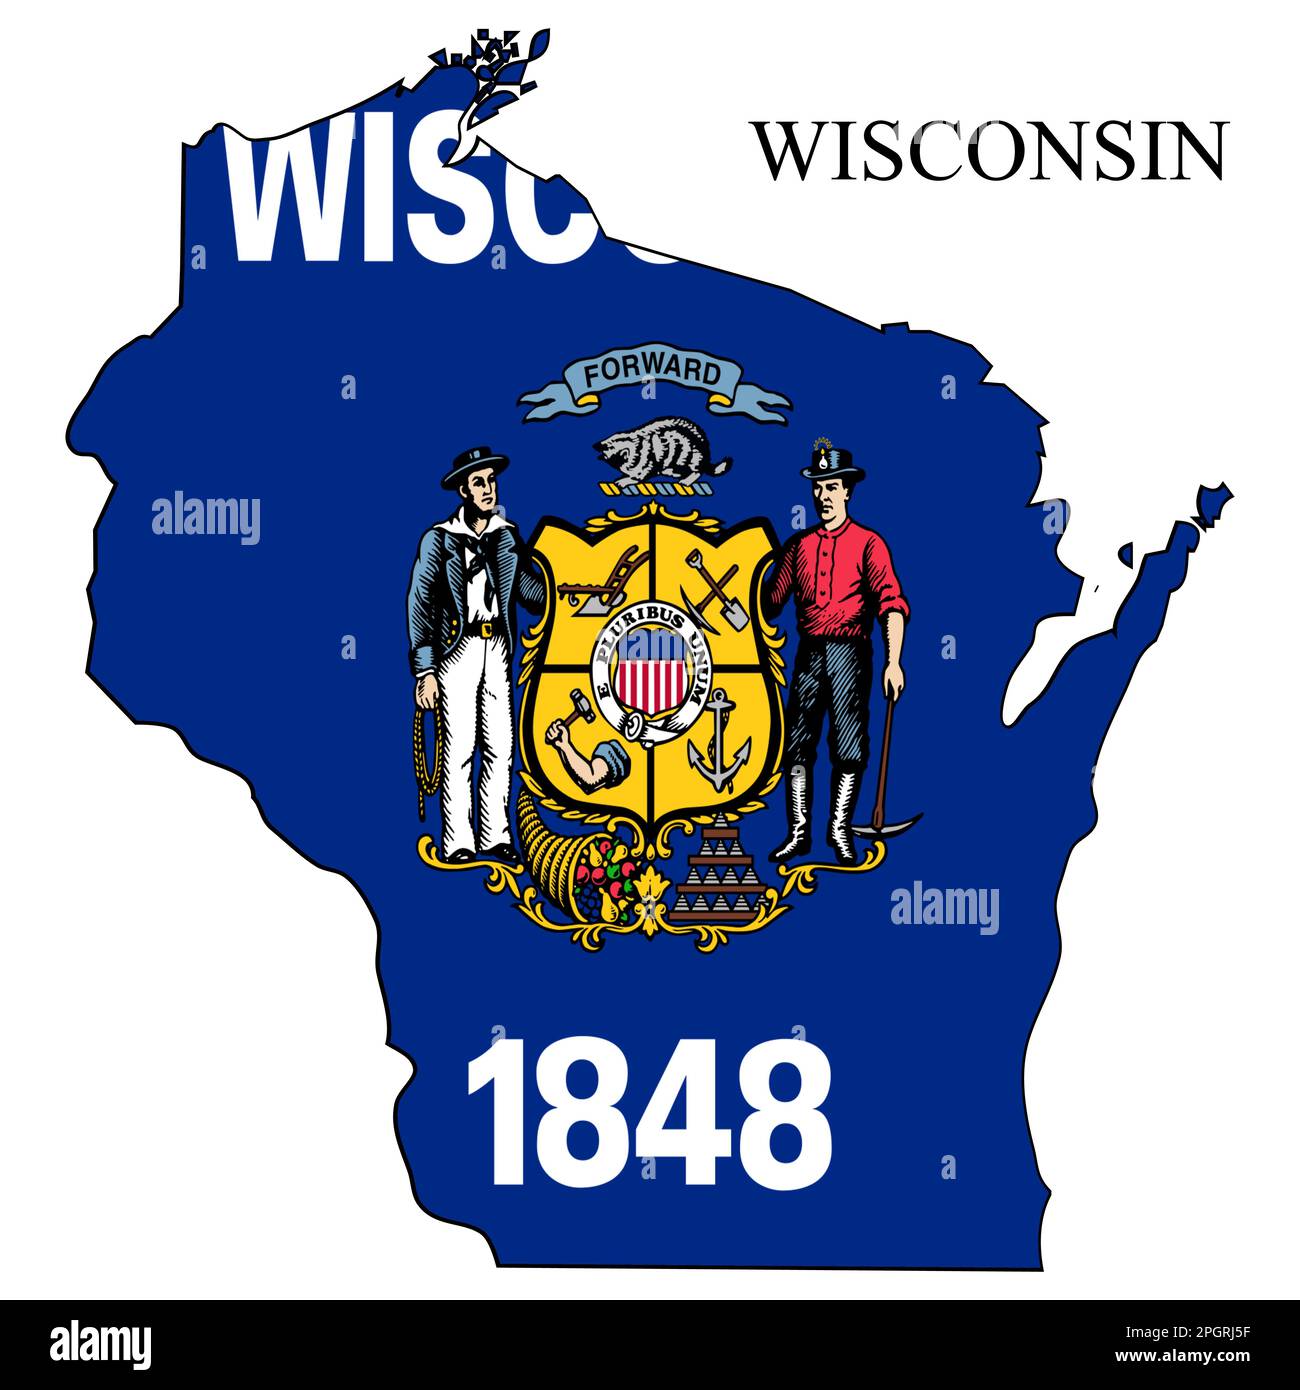 Wisconsin map vector illustration. Global economy. State in America. North America. United States. America. U.S.A Stock Vector